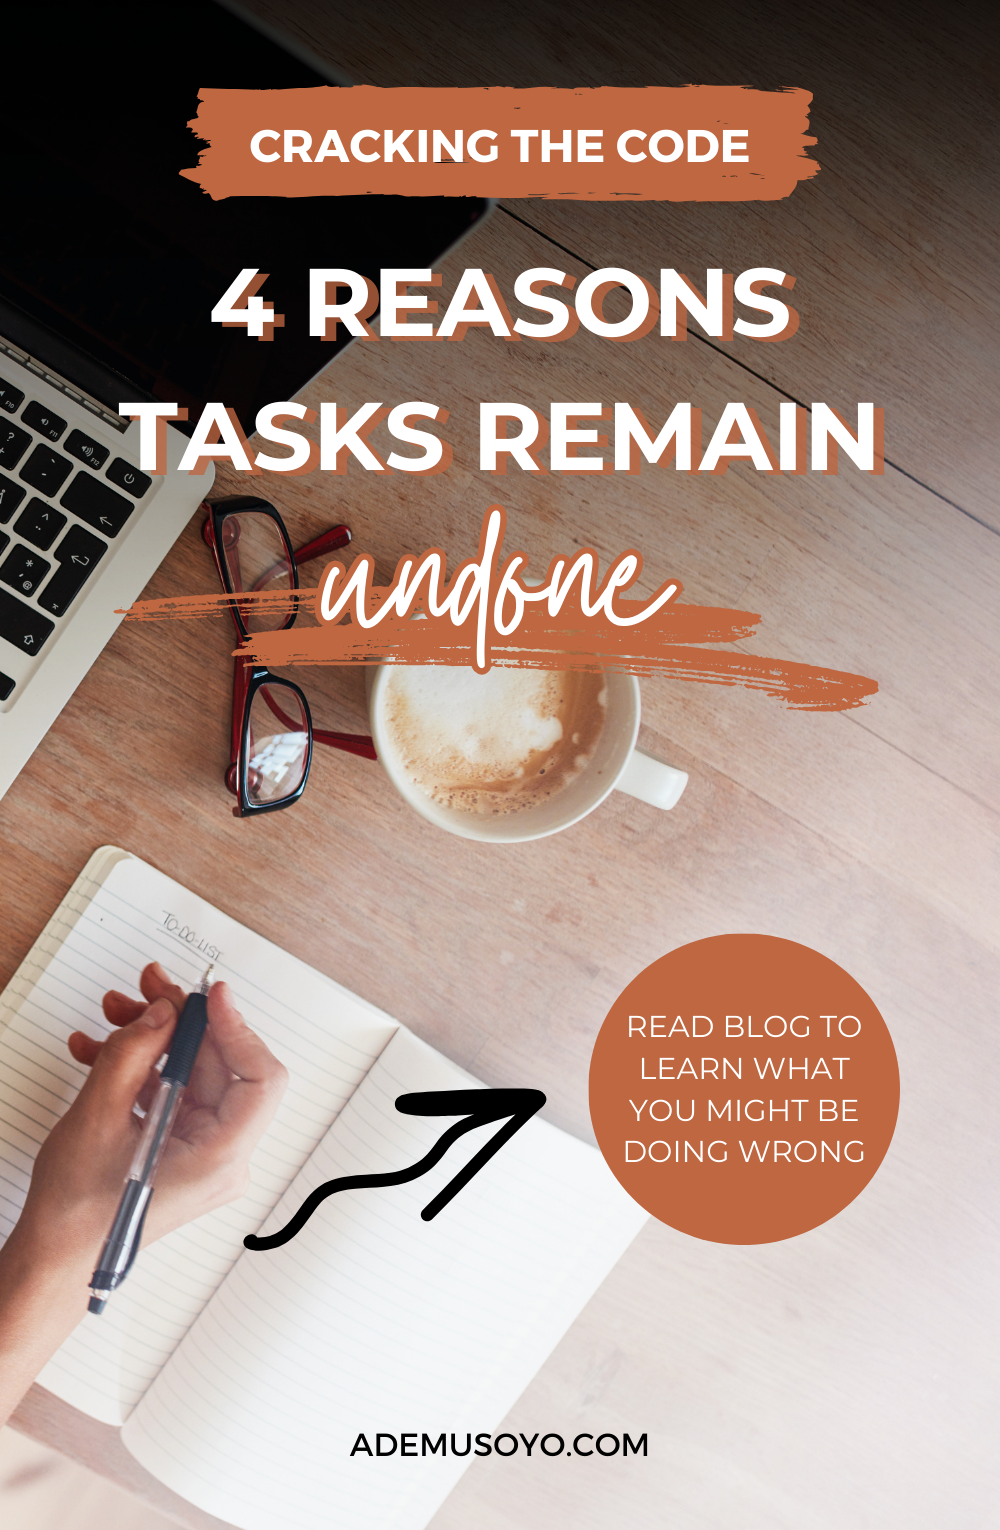 a blog cover image with a text overlay that reads as cracking the code: 4 reasons tasks remain undone. Read blog to learn what you might be doing wrong and you're not accomplishing any task.